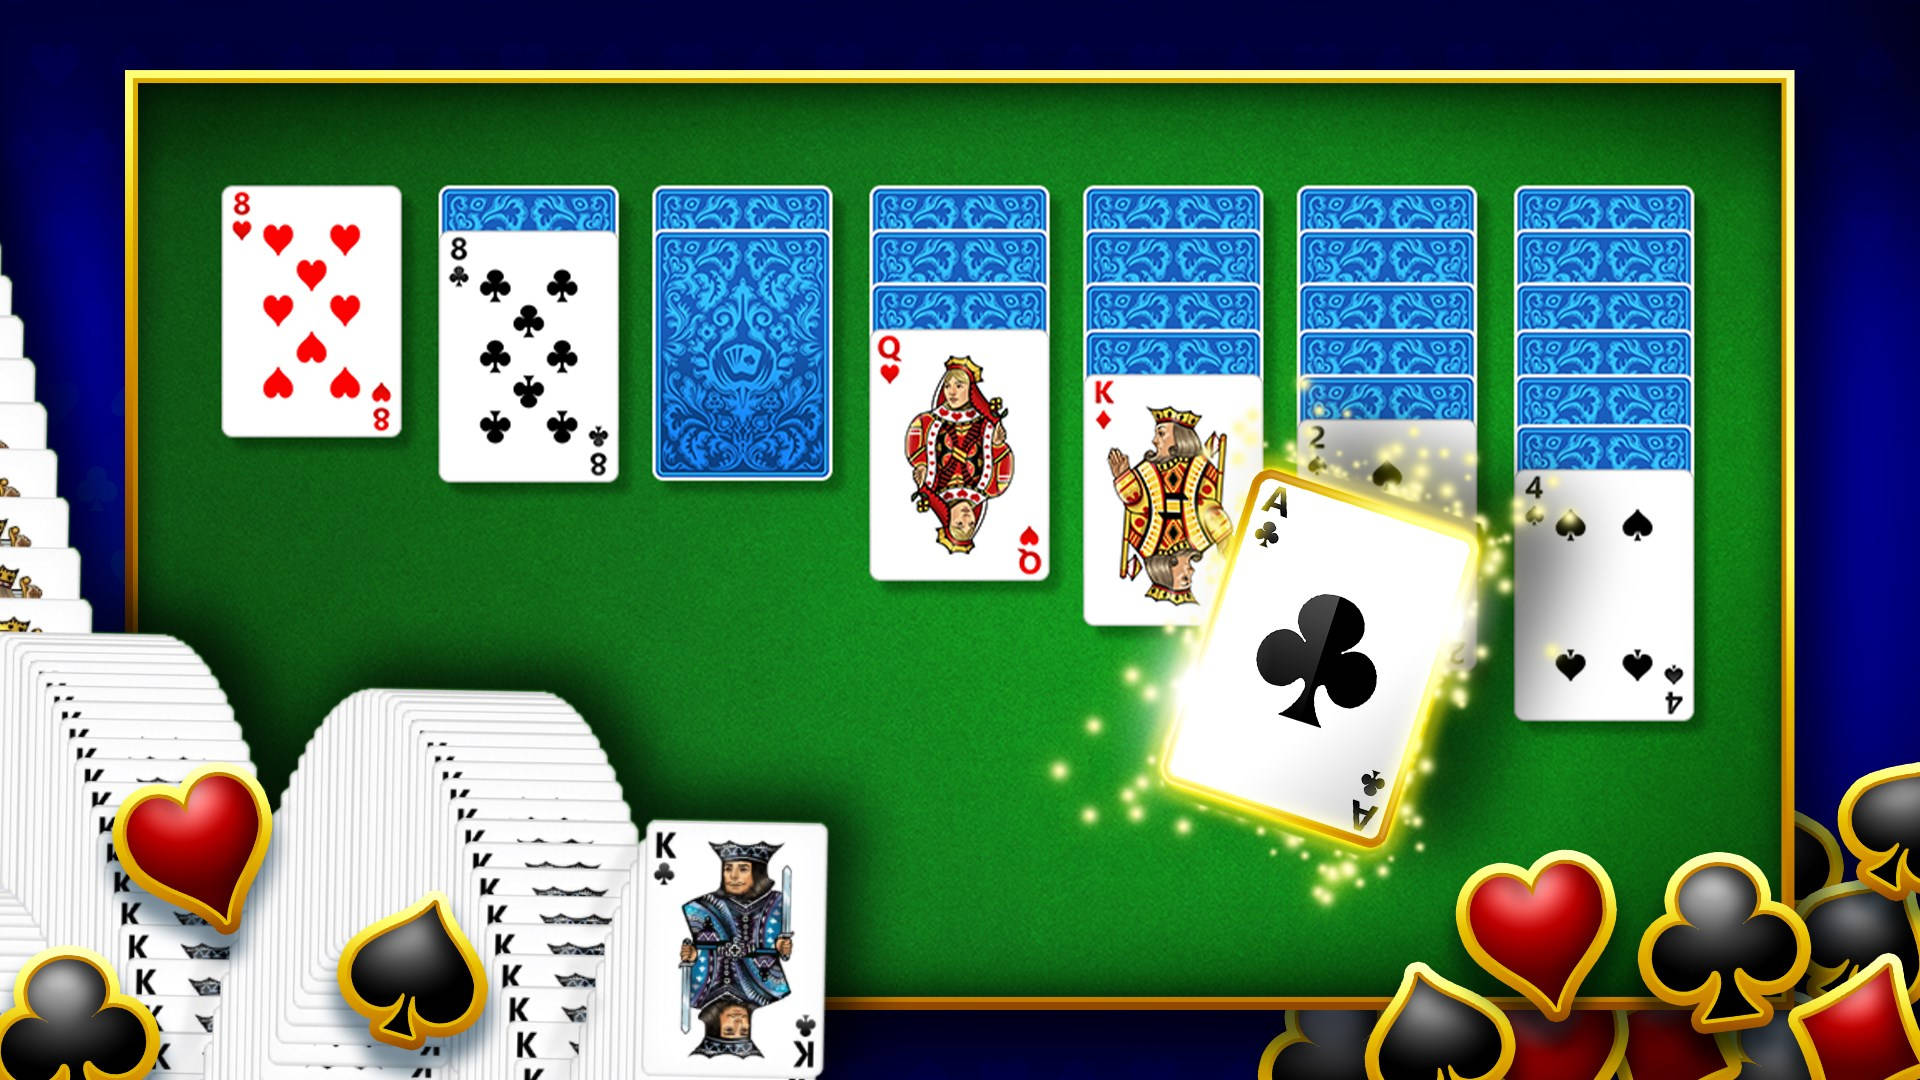 Klondike Solitaire Collection Free for Windows 10 - Free download